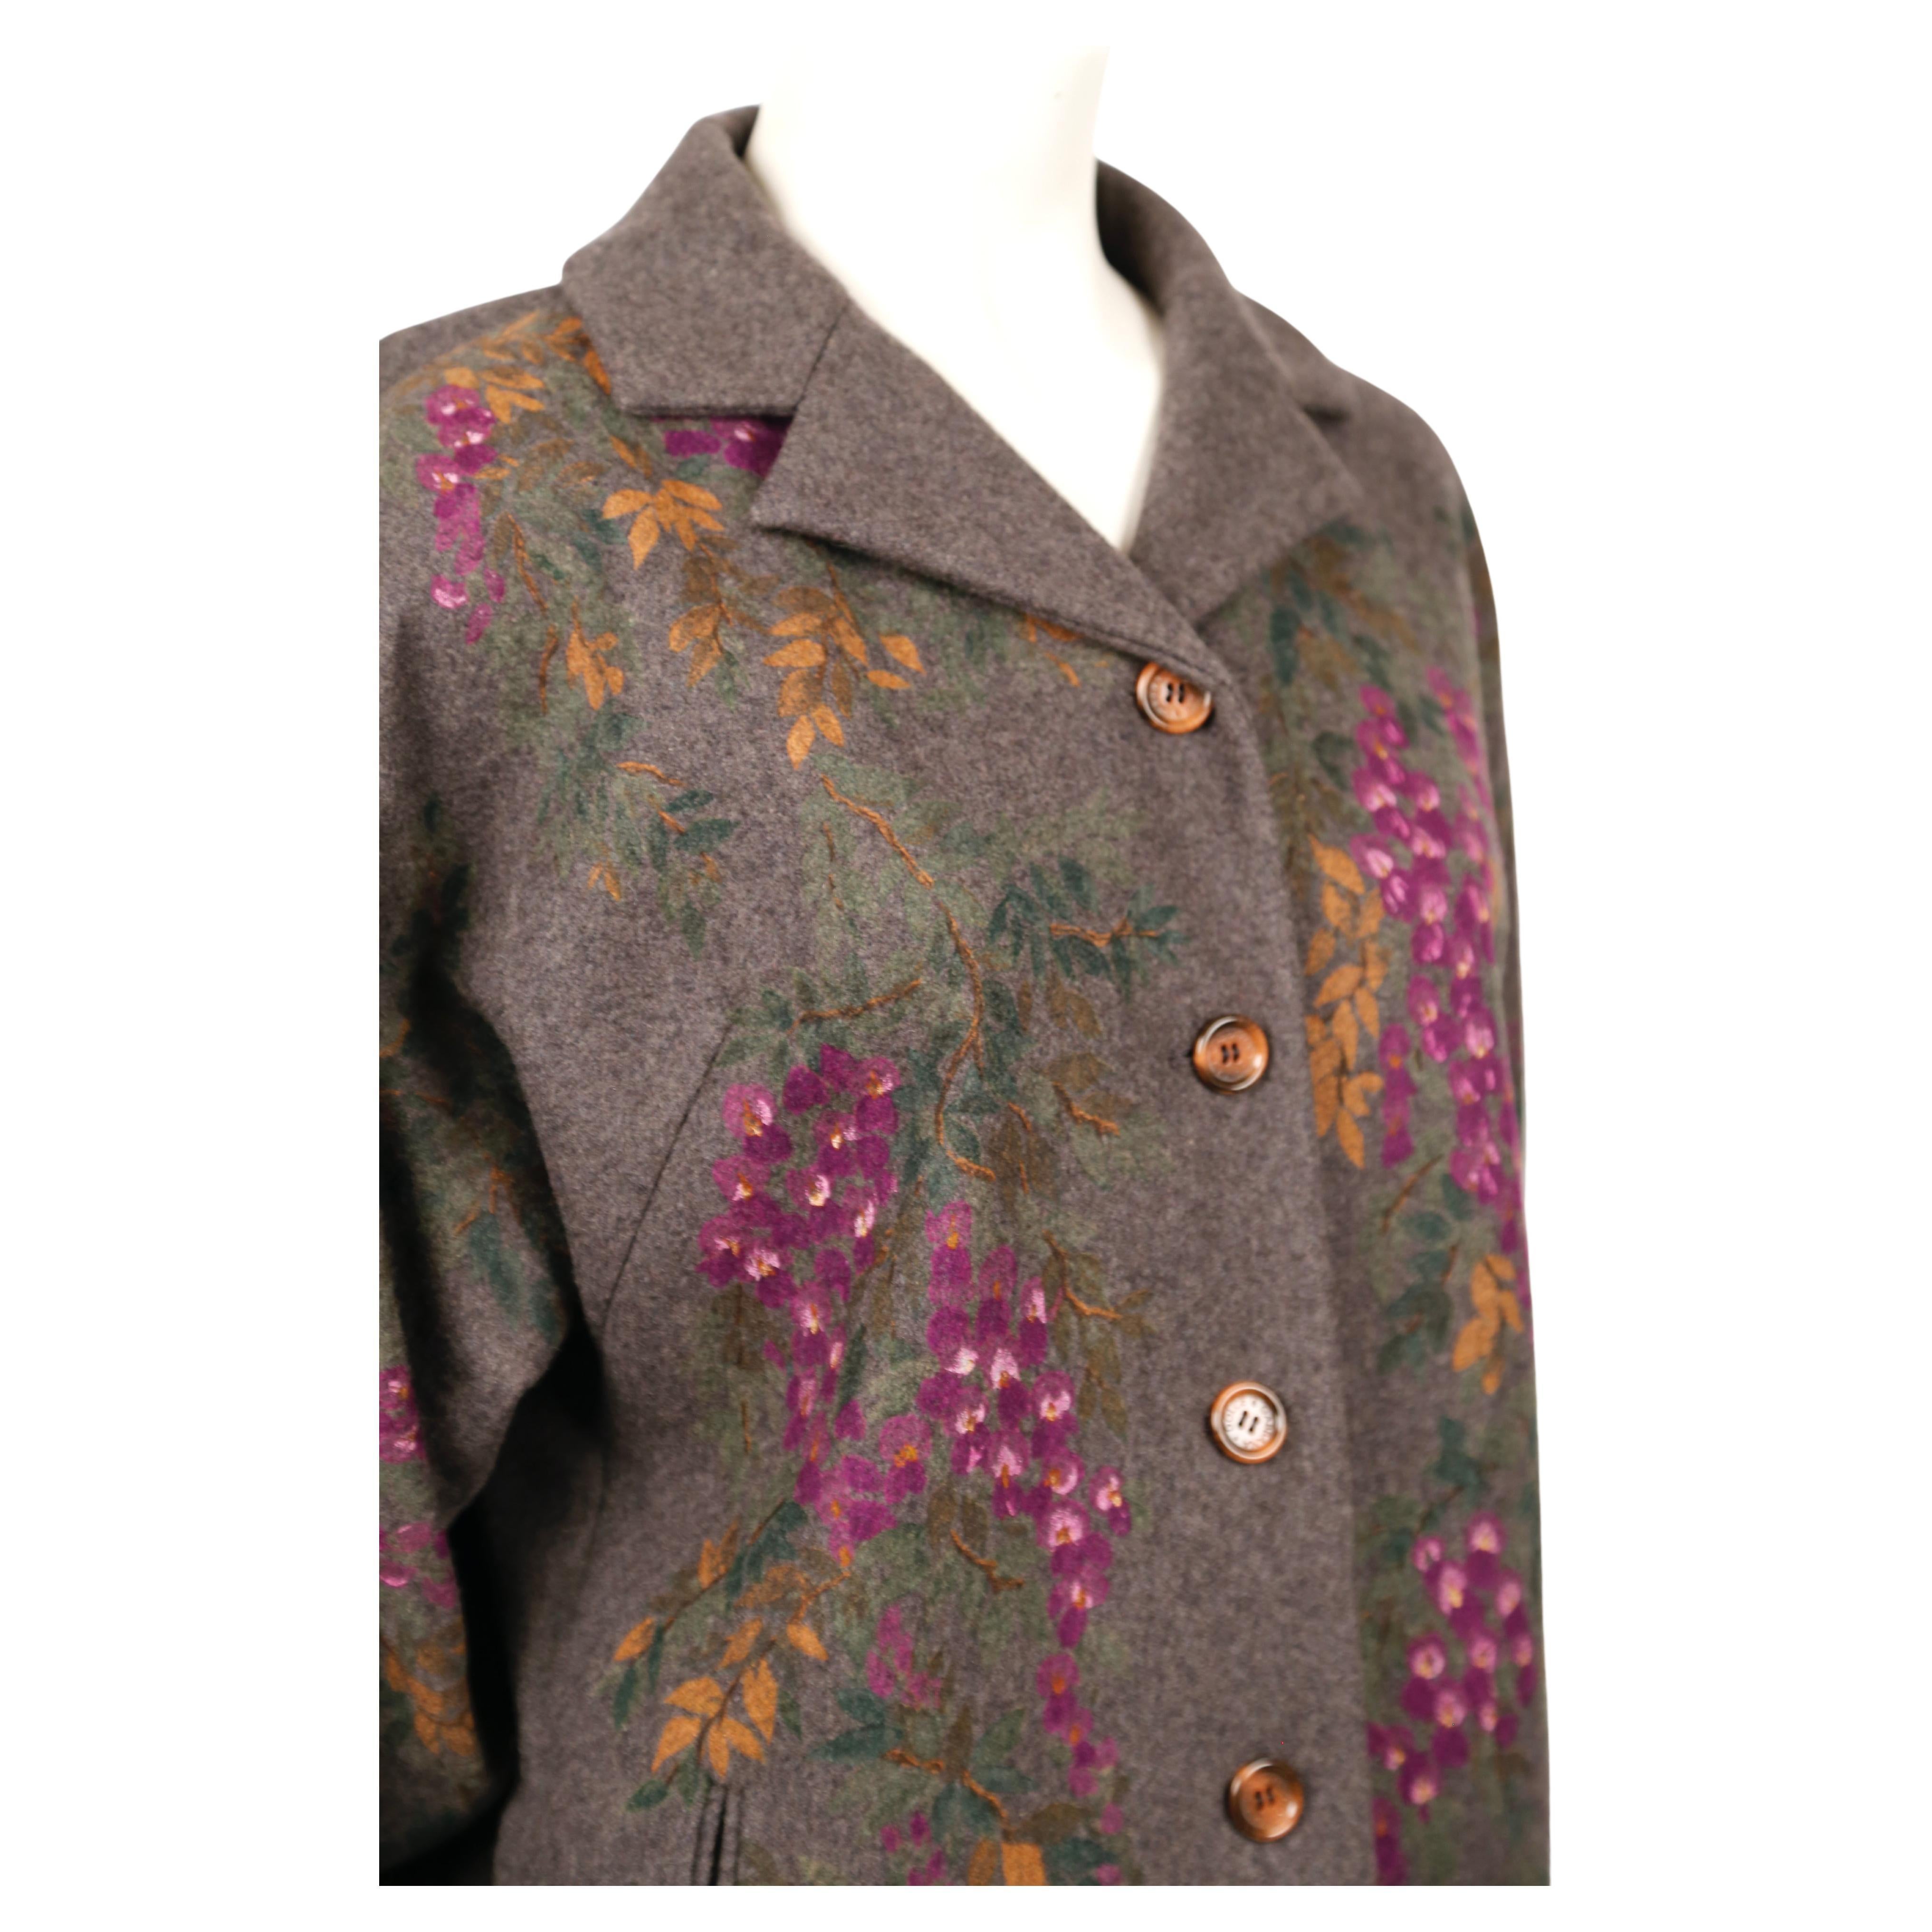 1998 DOLCE & GABBANA hand painted Kimono coat in grey wool In Excellent Condition For Sale In San Fransisco, CA